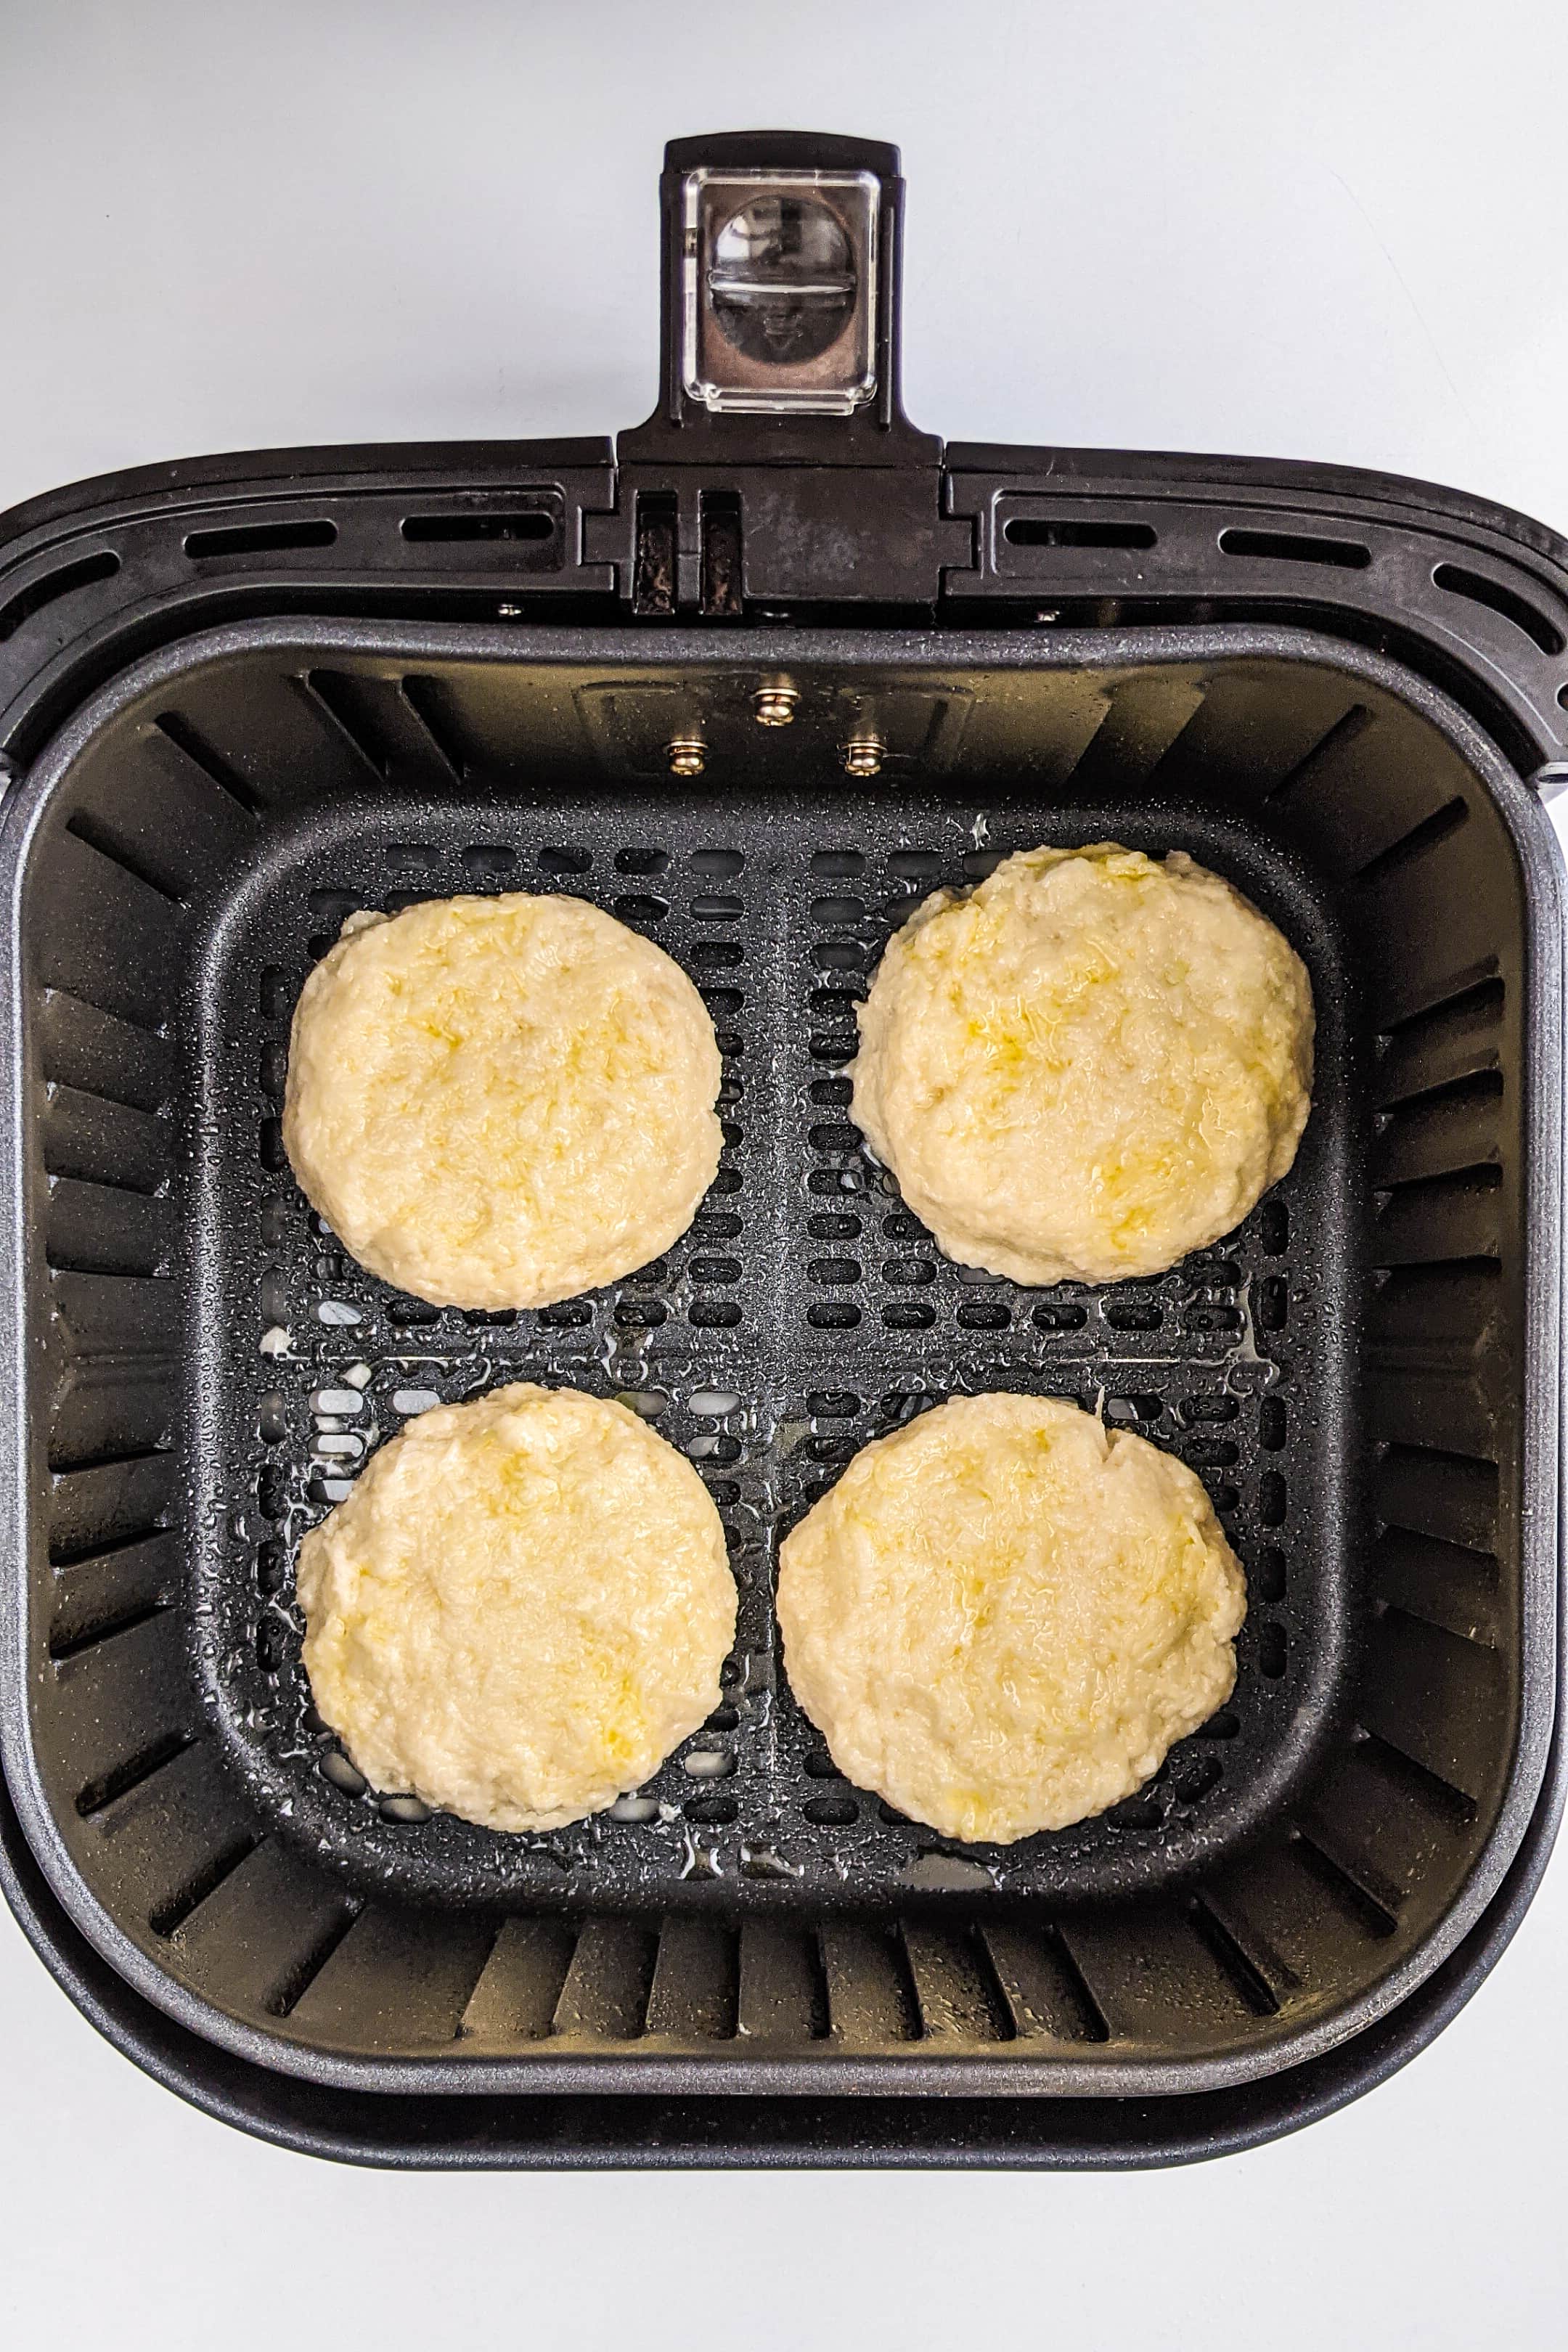 Raw hash browns in the air fryer basket.